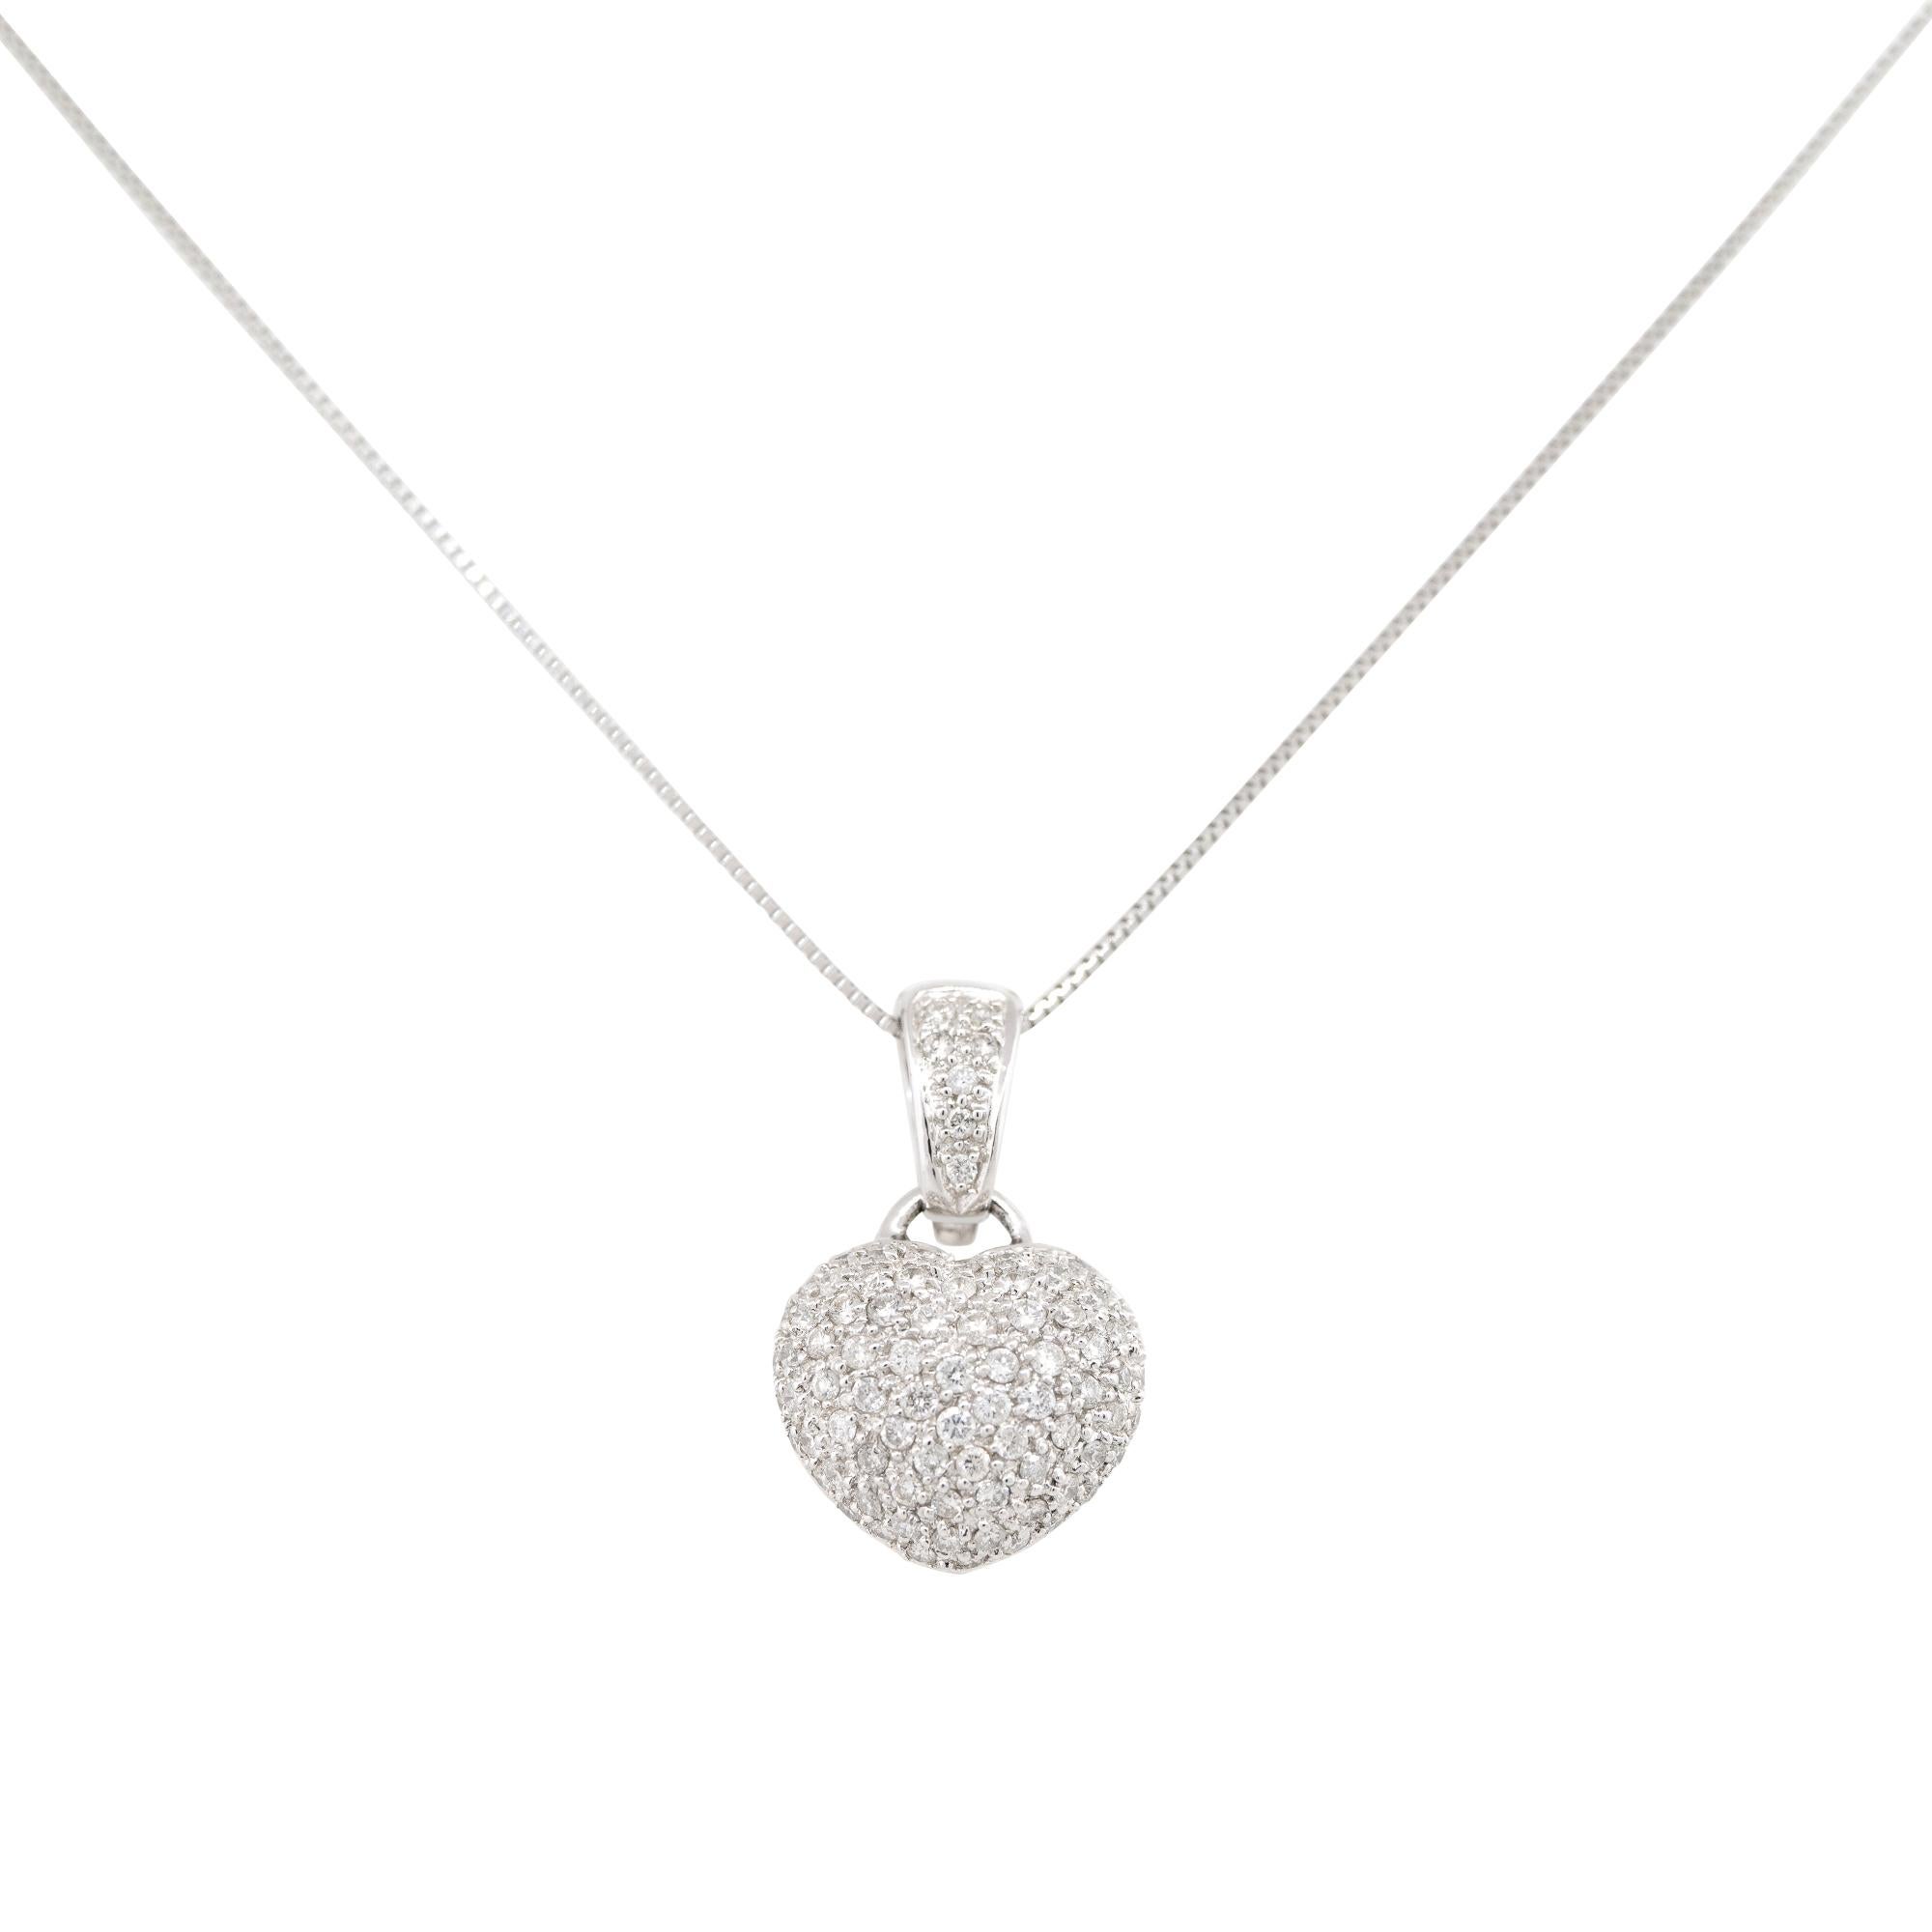 18k White Gold 1.15ctw Mini Pave Diamond Puffed Heart Necklace
Material: Pendant: 18k White Gold, Chain: Platinum
Diamond Details: Approximately 1.15ctw of Pave set, Round Brilliant cut Diamonds. All diamonds are approximately H/I in color and